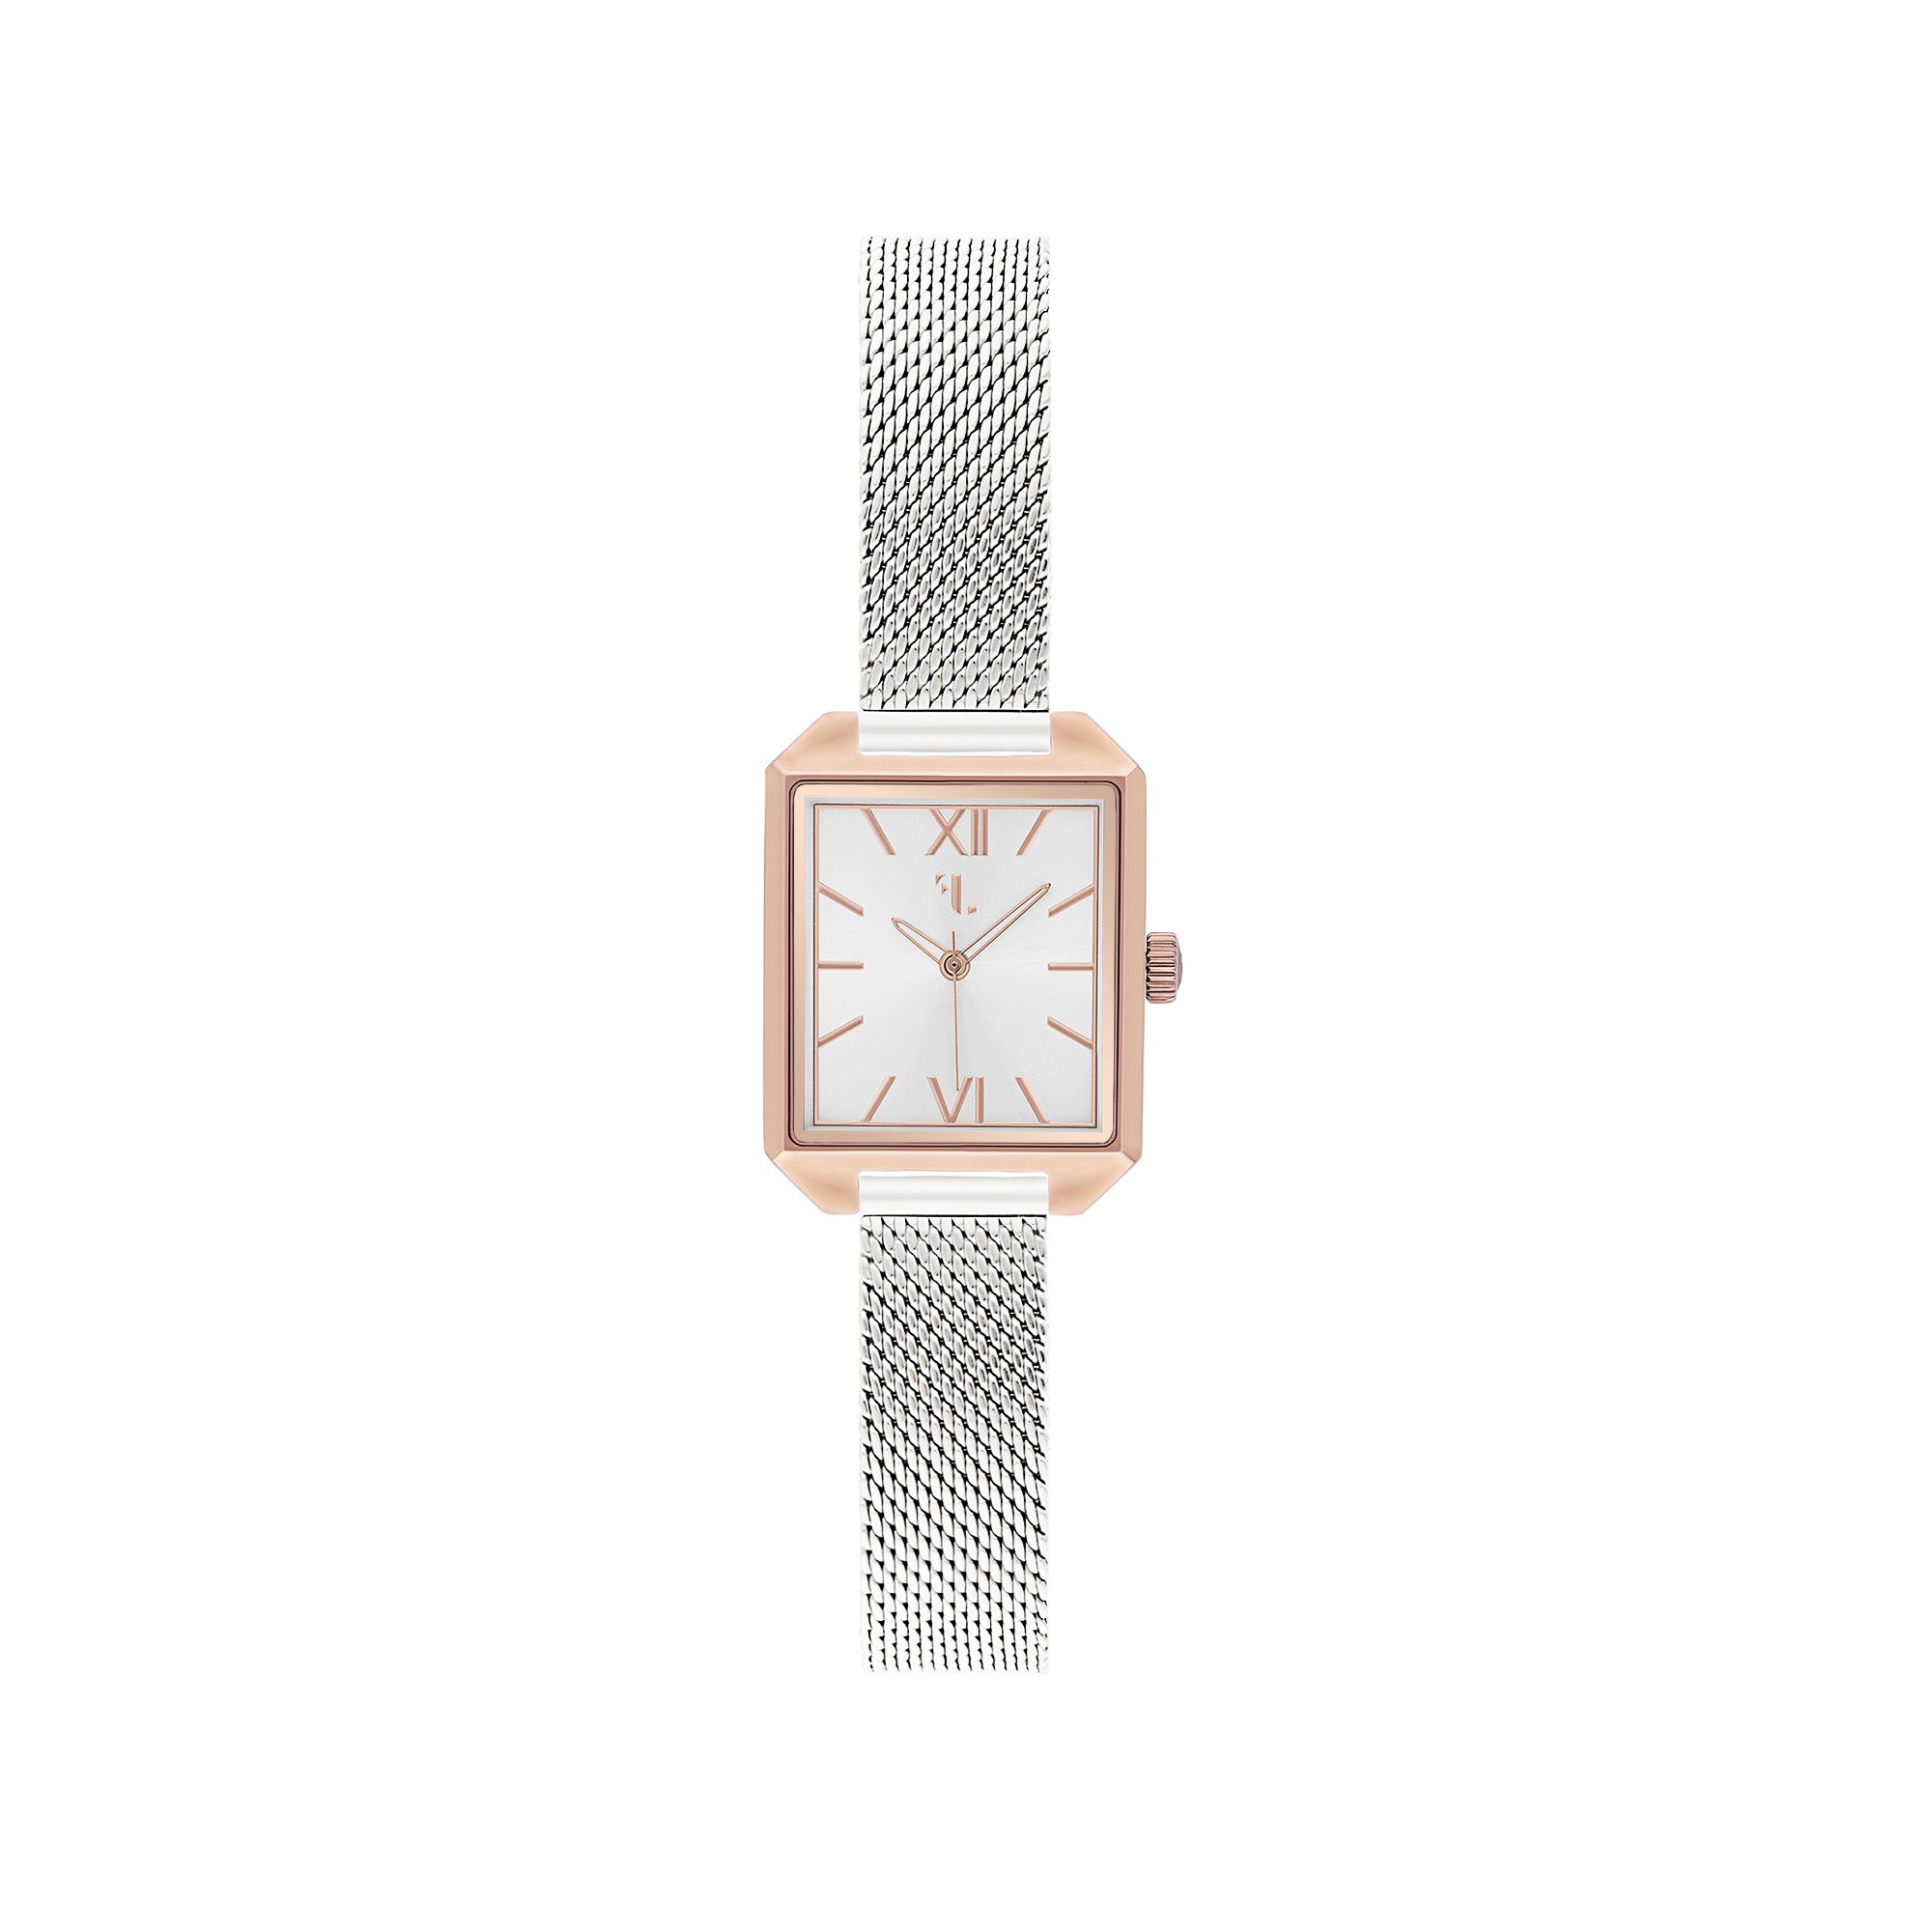 Rosedale watch by Five Jwlry, featuring a small square silver shiny dial set in a rose gold case with matching handle and mesh band. Designed in Montreal, it boasts quartz movement, 5ATM water resistance, a 2-year warranty, and an interchangeable bracelet with the easy release function.